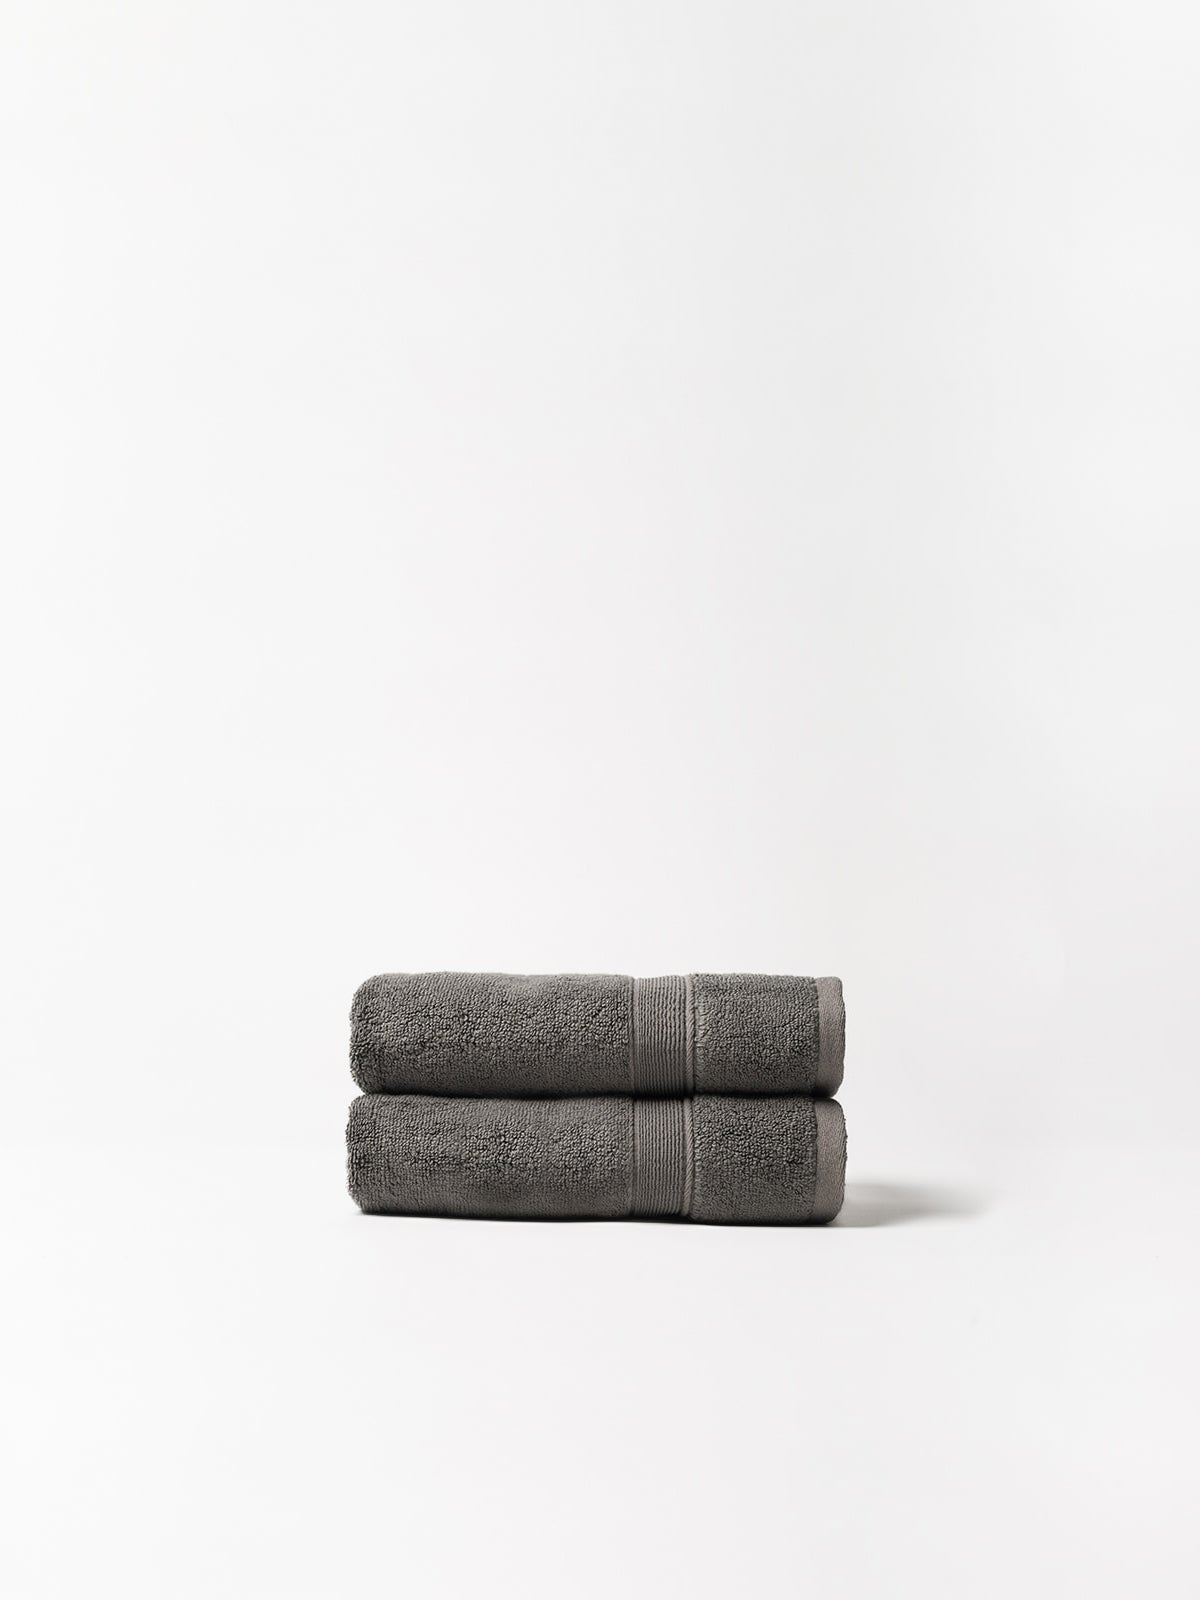 Charcoal hand towels folded with white background |Color:Charcoal